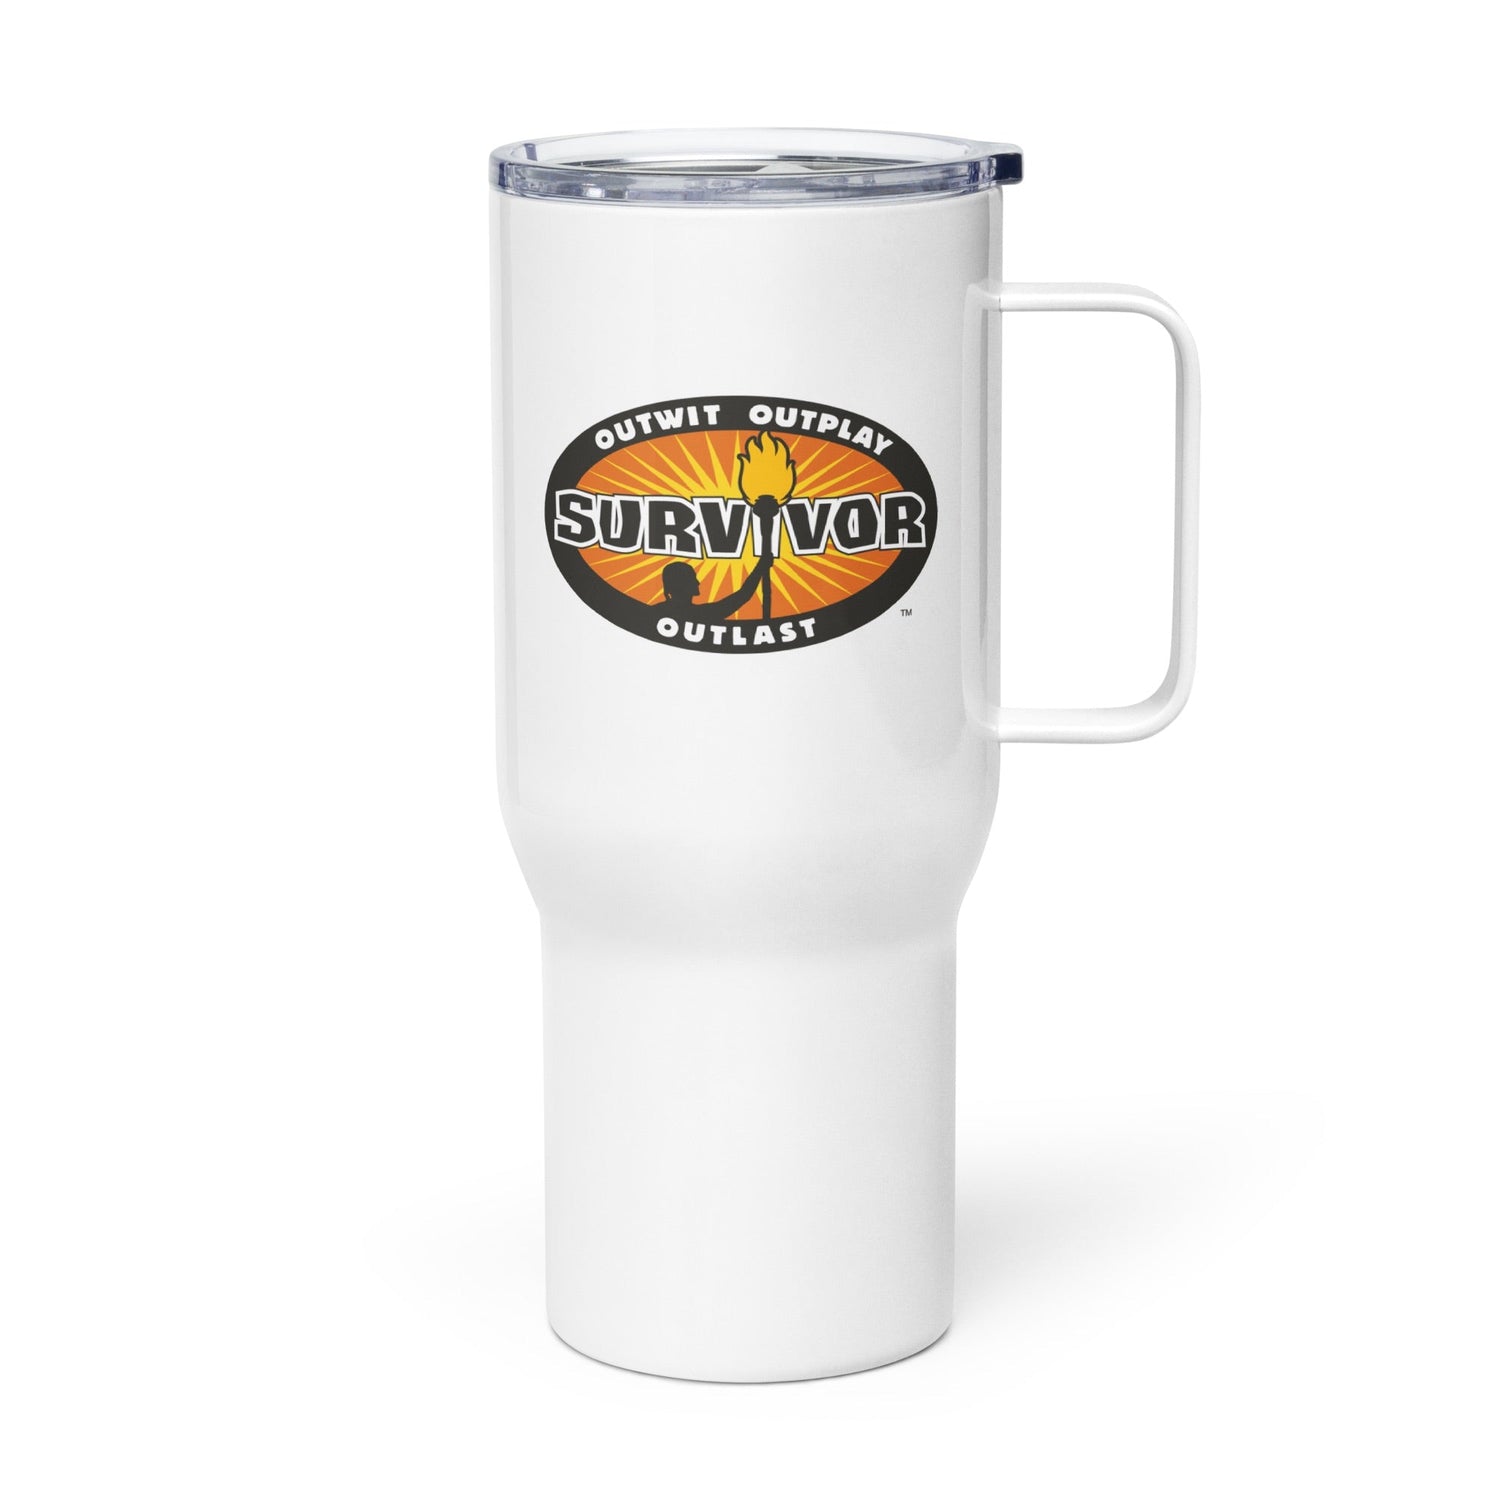 Survivor Outwit, Outplay, Outlast Logo Travel Mug With Handle - Paramount Shop